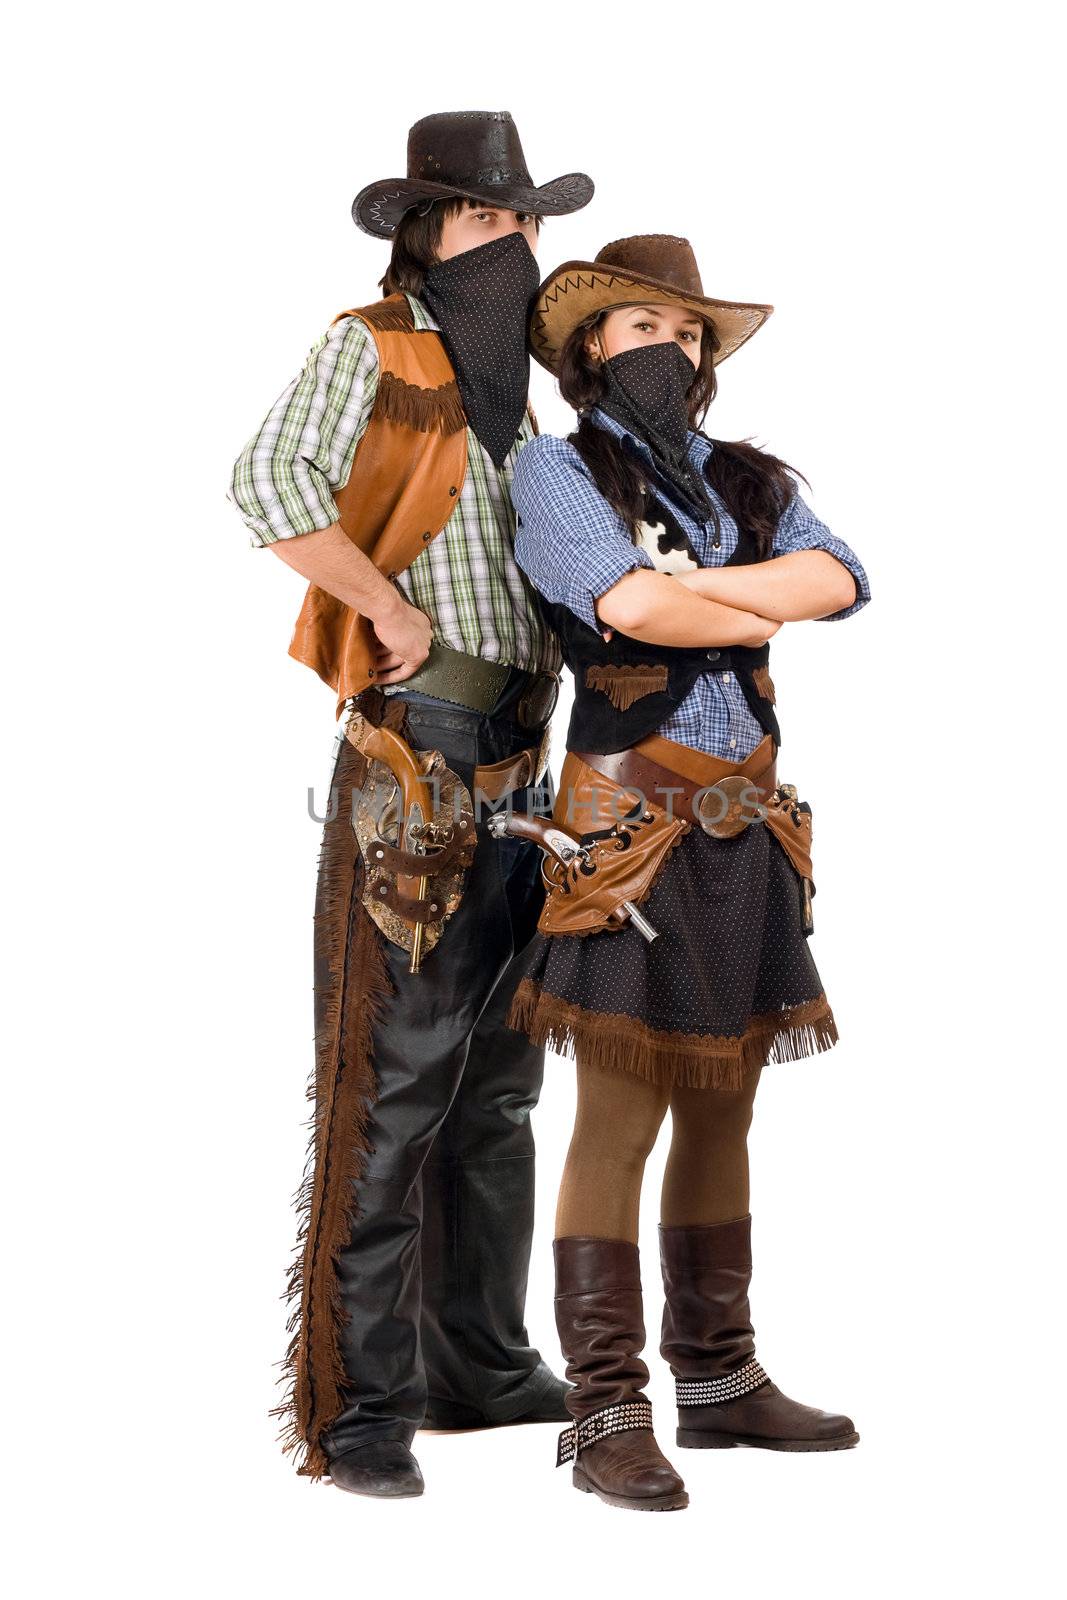 Couple of burglars in cowboy costumes. Isolated